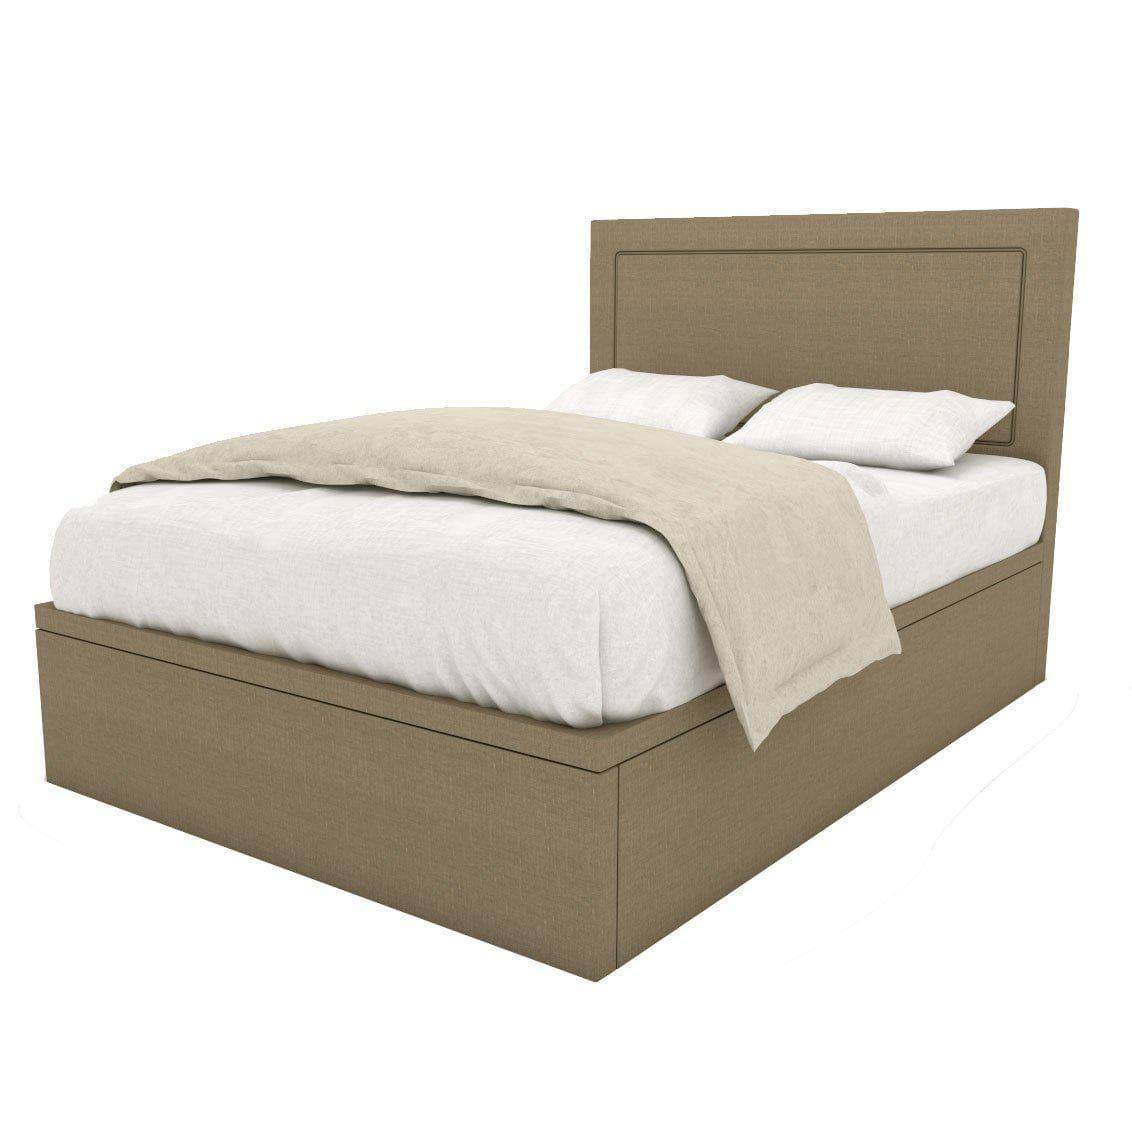 Garrice Brown Fabric Storage Bed Frame (Water Repellent) Singapore